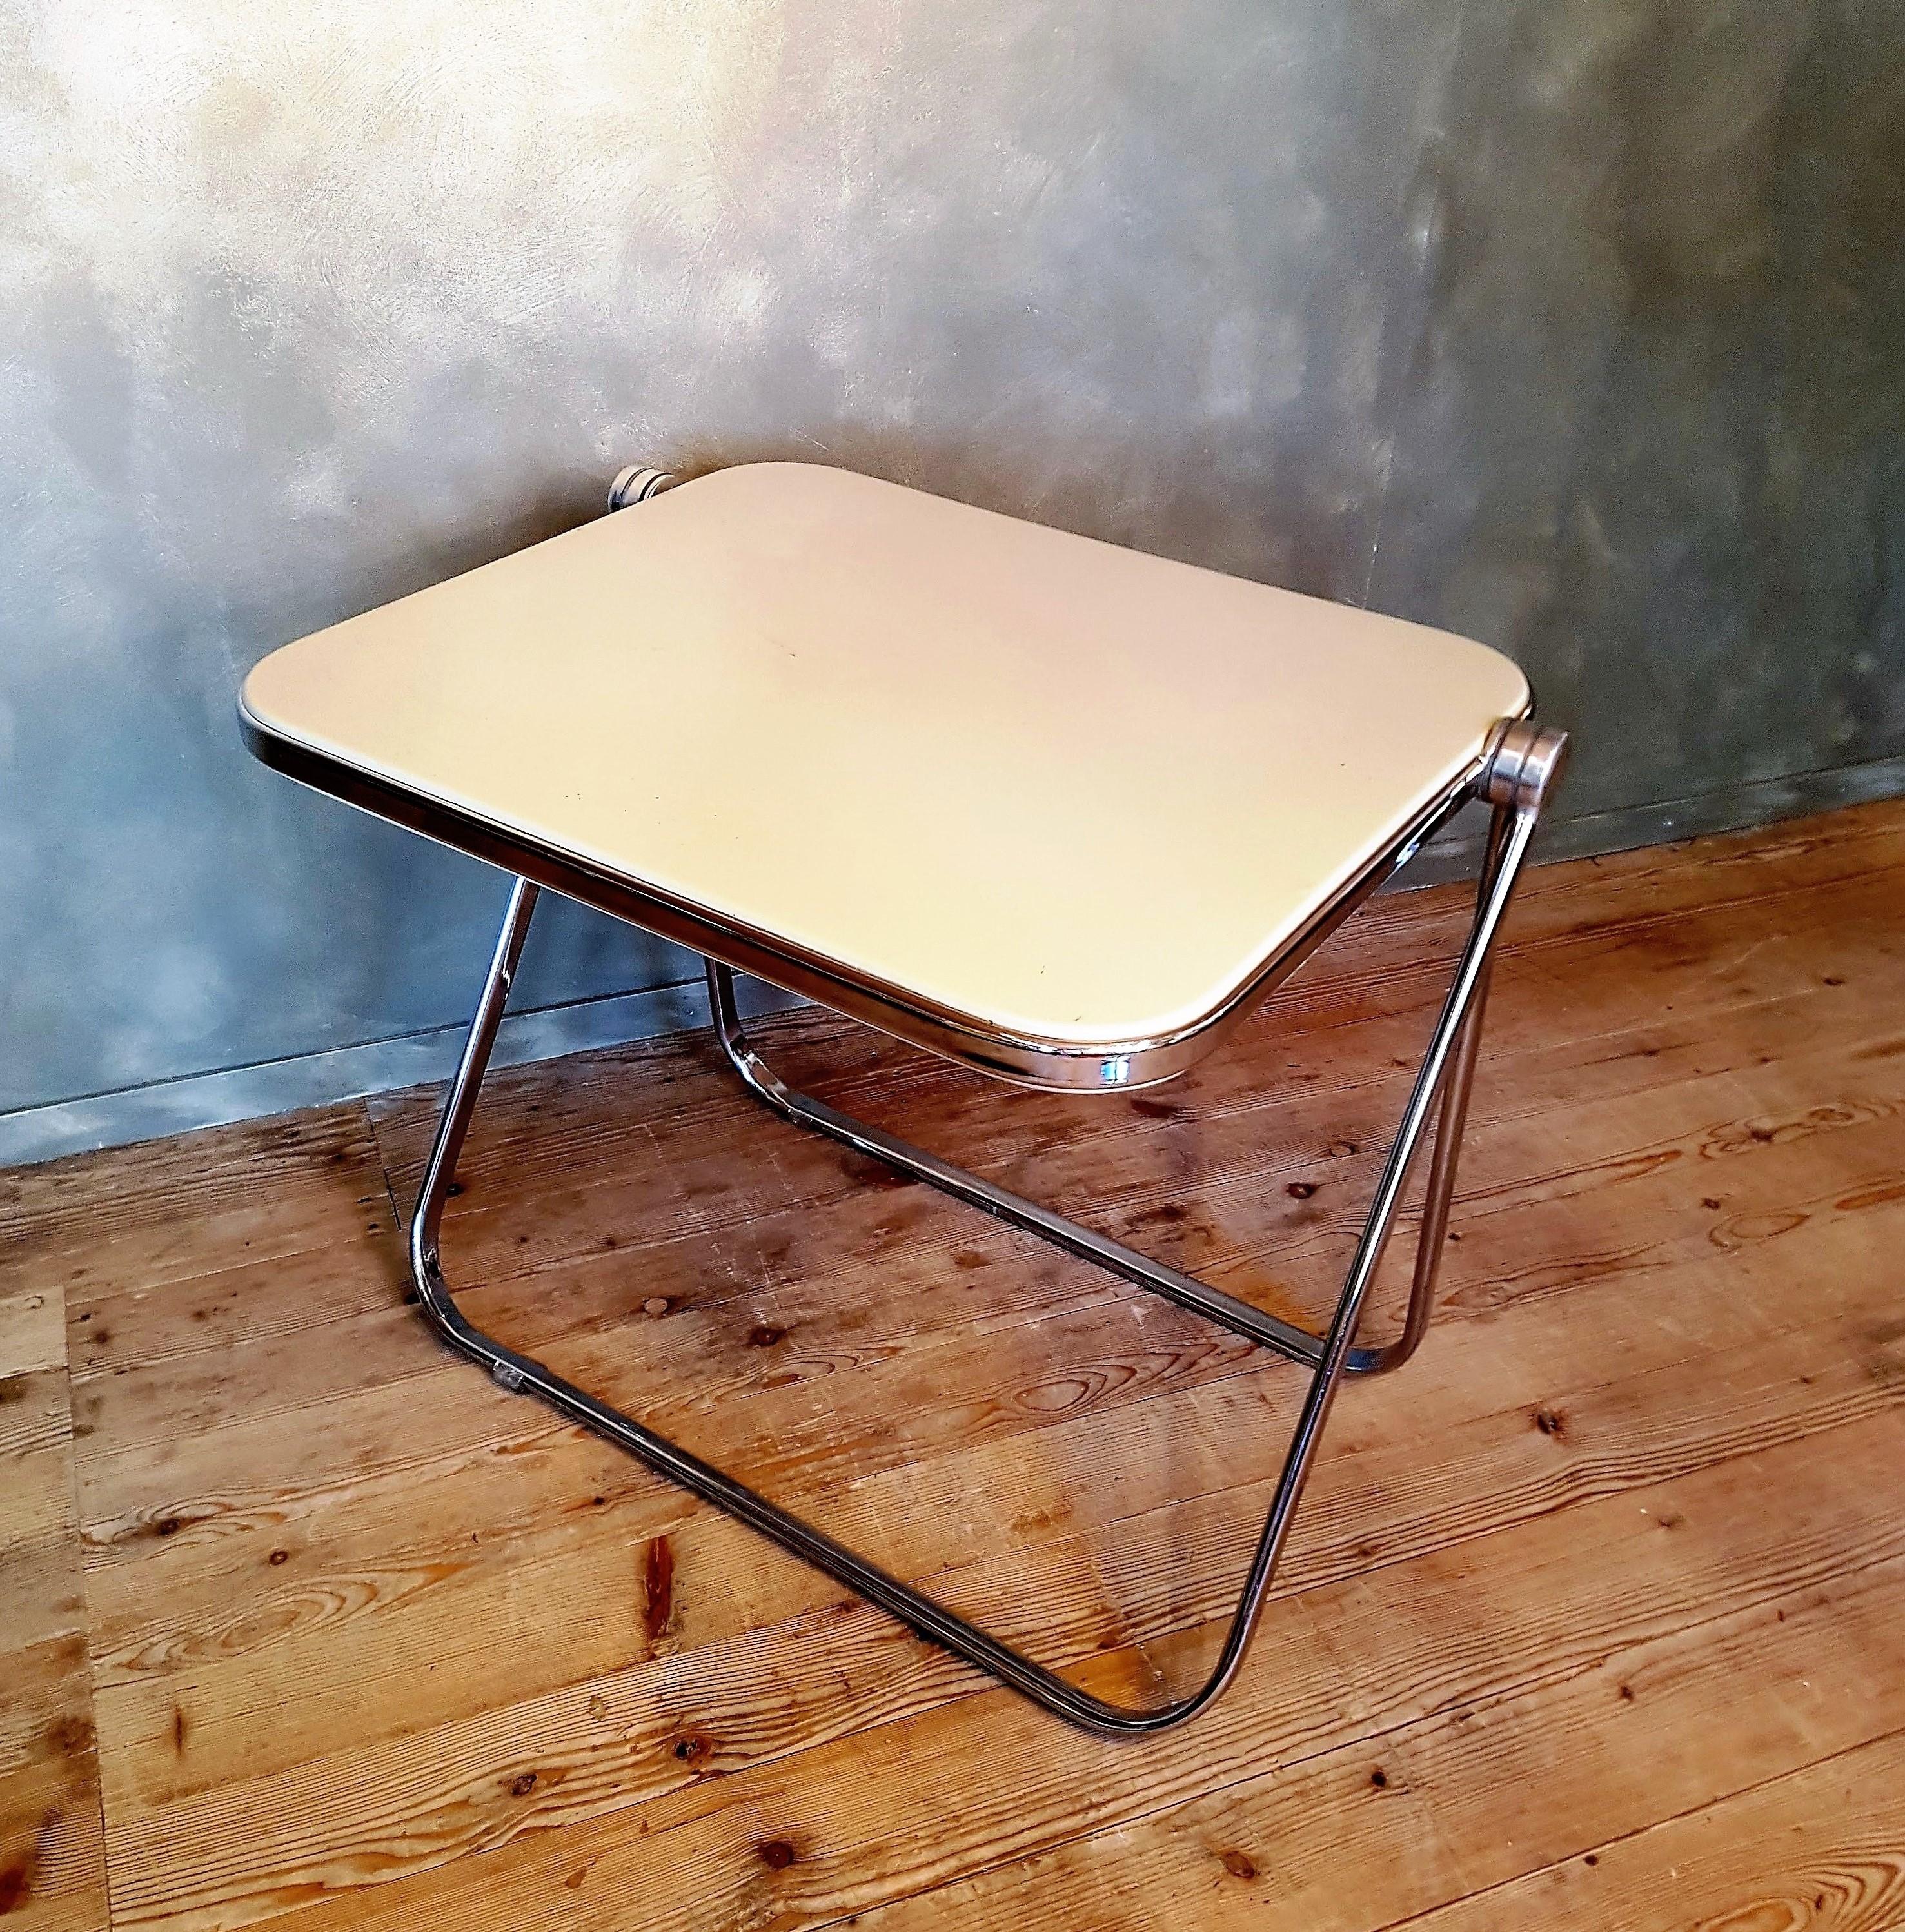 This folding table was designed by Giancarlo Piretti for Anonima Castelli in 1967. On the writing plate there are no dimples for the writing material as on other tables fabricated later.
It was made of plastic and chromed steel in Italy. The